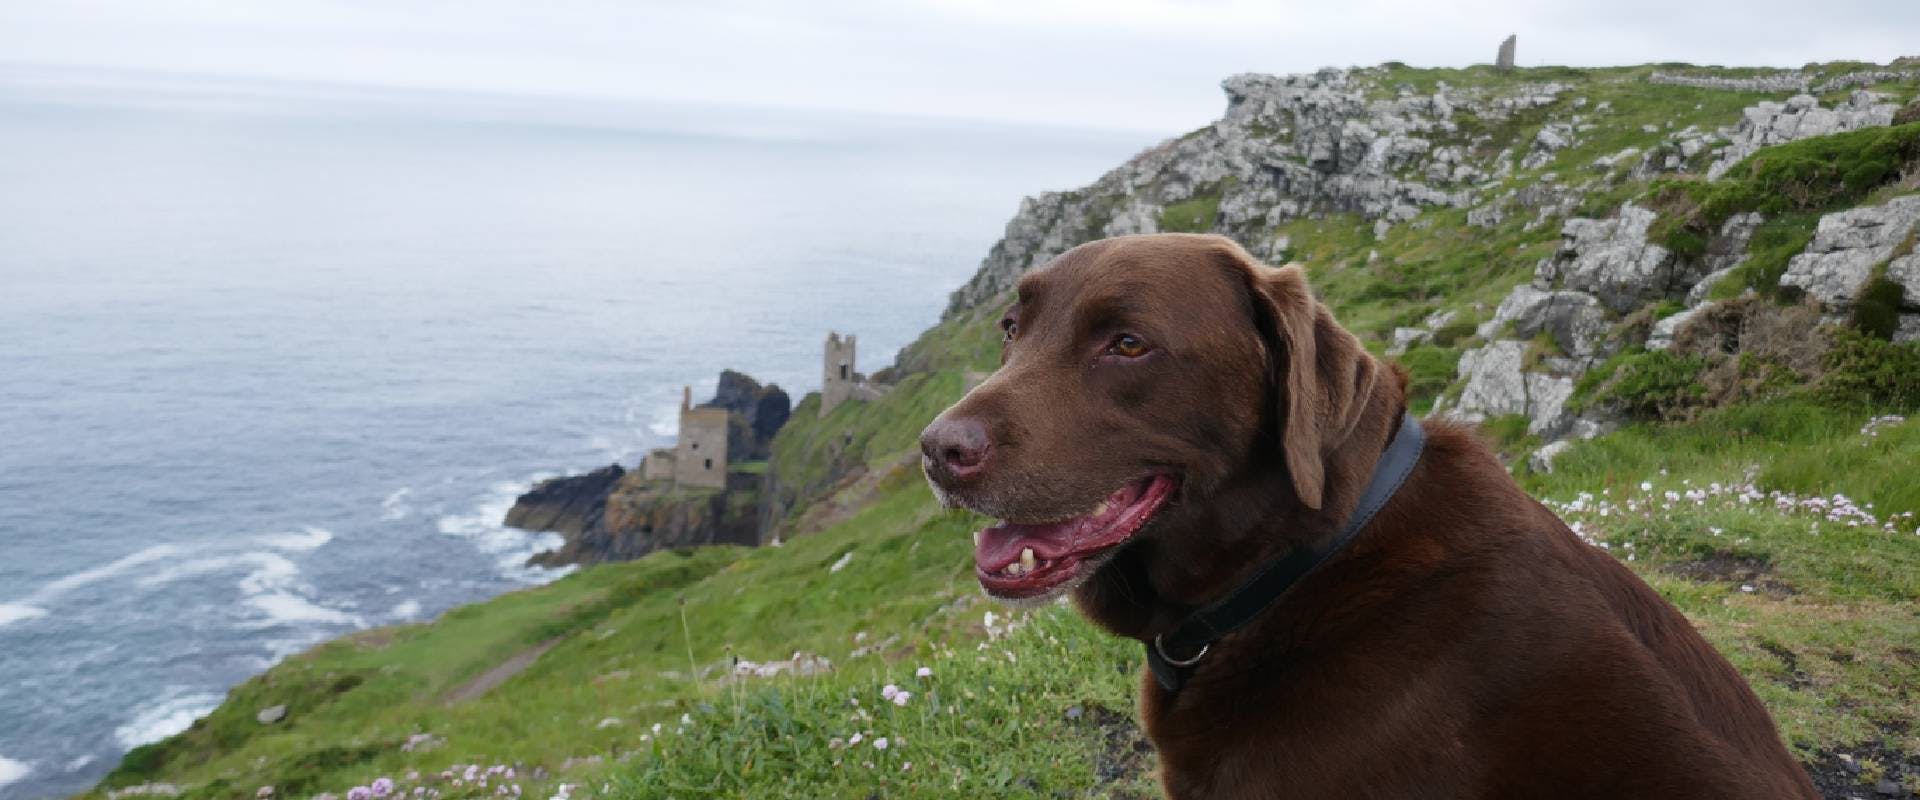 Dog in St. Ives